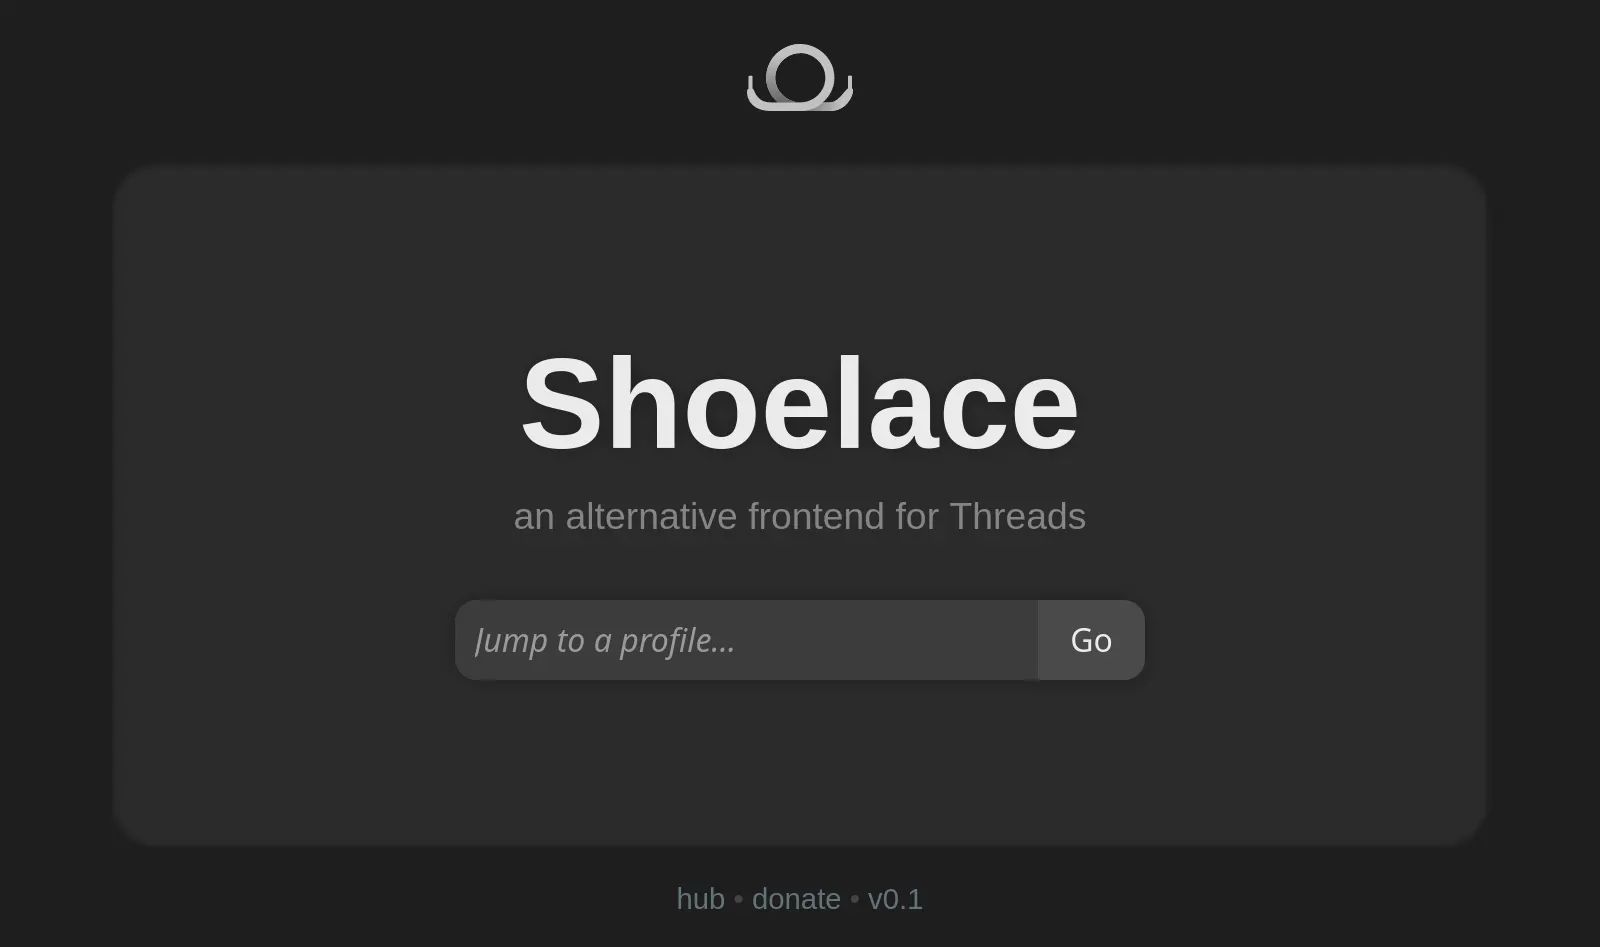 A screenshot of Shoelace’s homepage, showing the logo on top, the title “Shoelace”, the subtitle “an alternative frontend for Threads”, an input bar with the tooltip “Jump to a profile…”, and at the bottom three links: “hub”, “donate”, and “v0.1”.